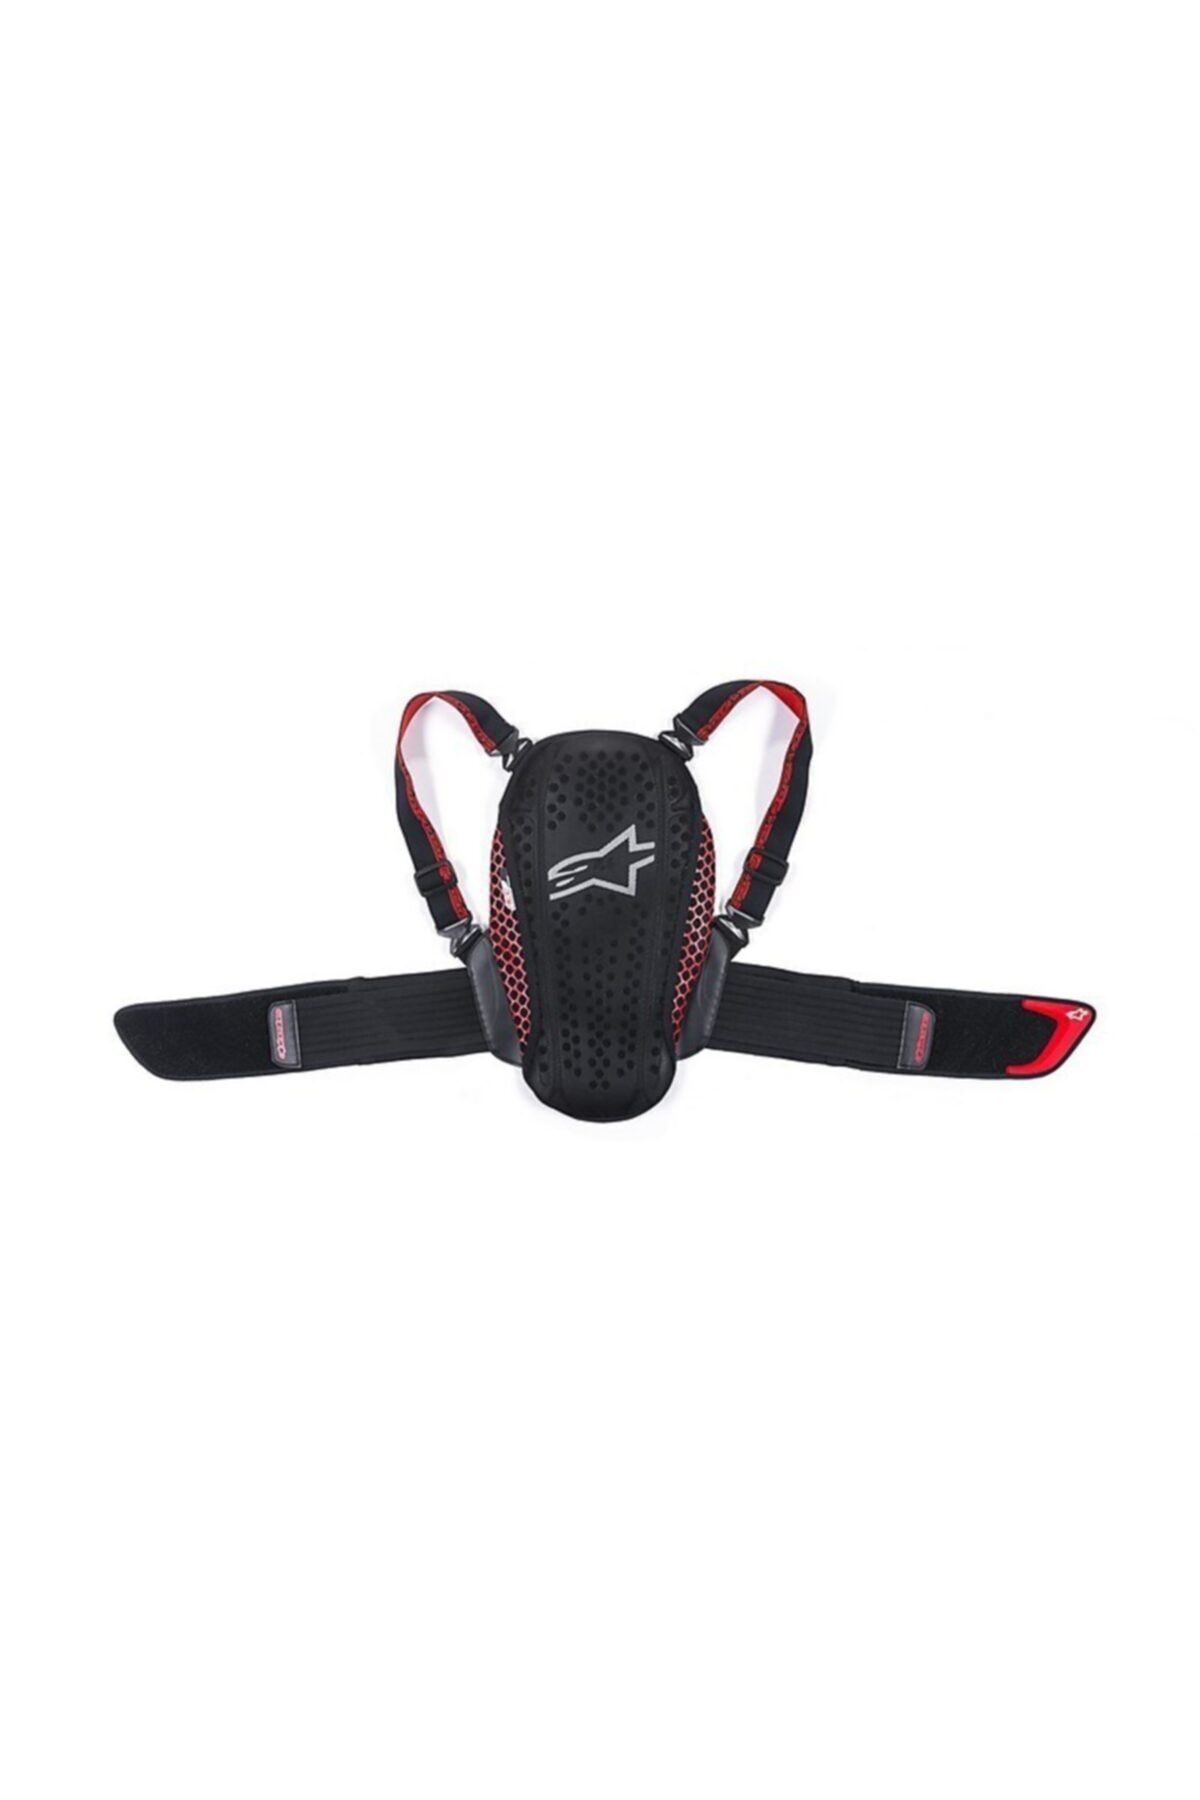 Alpinestars Nucleon Kr-y Youth Protector For Kids